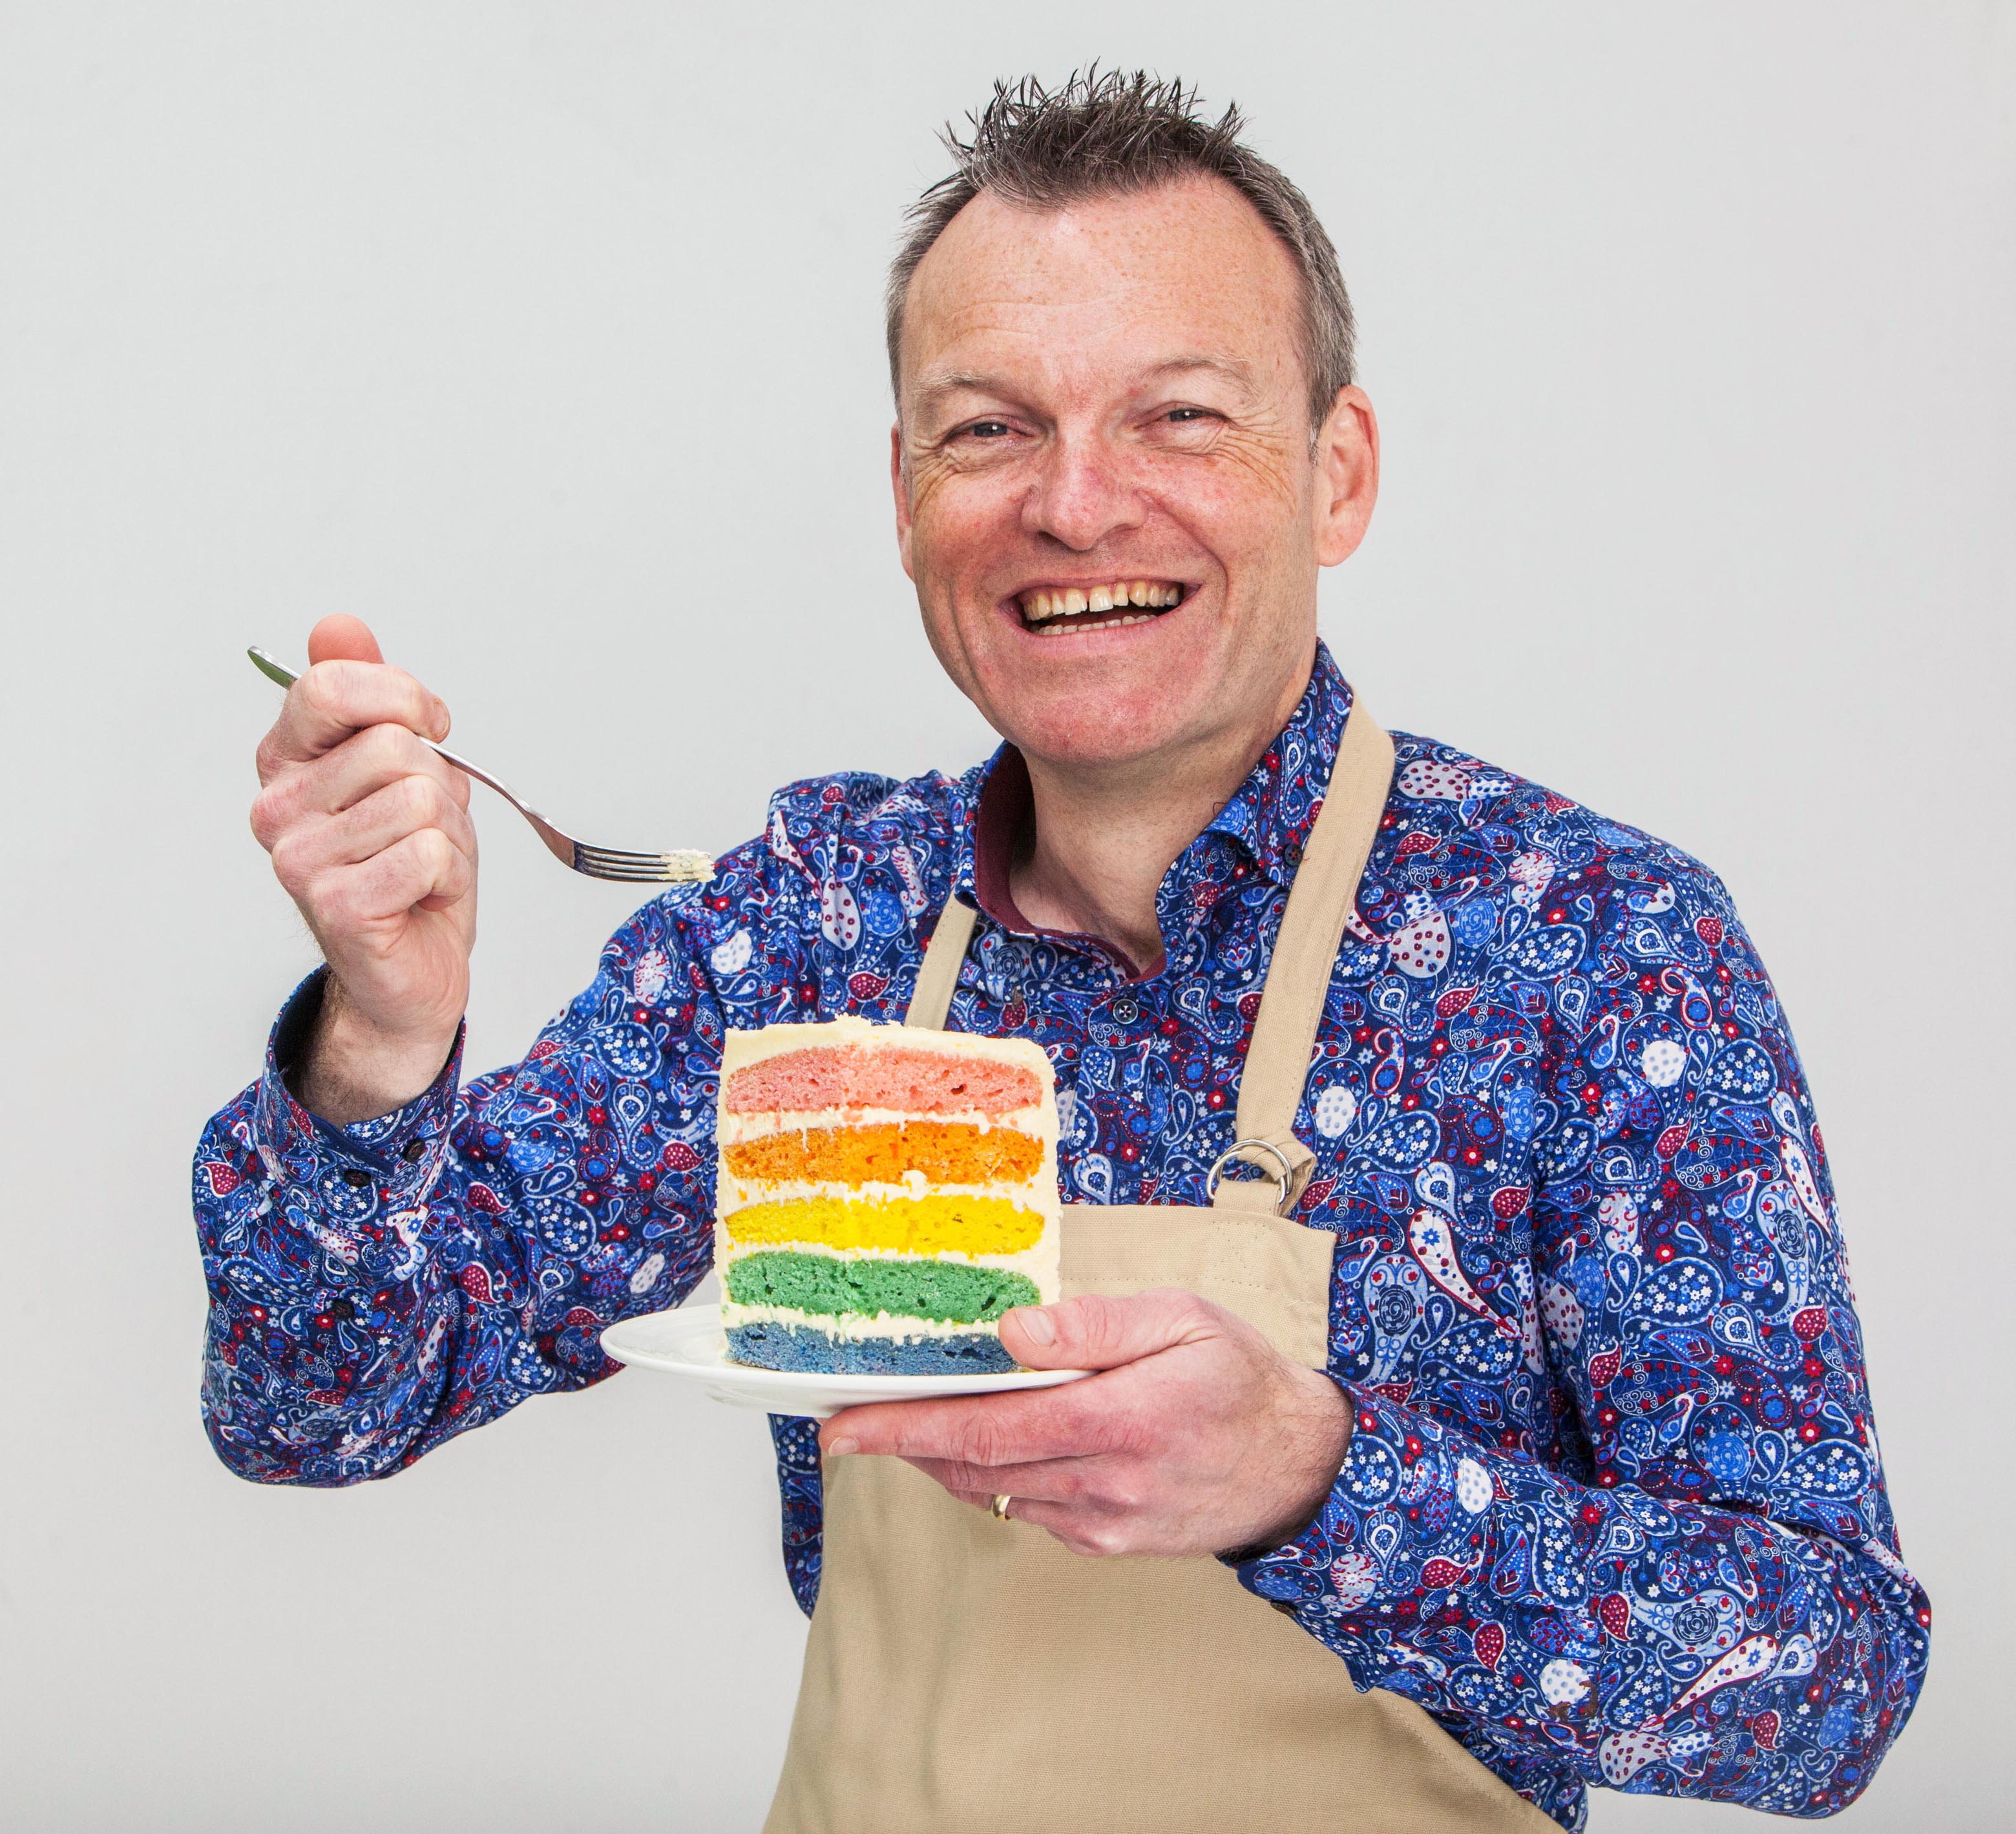 Chris on the Great British Bake Off